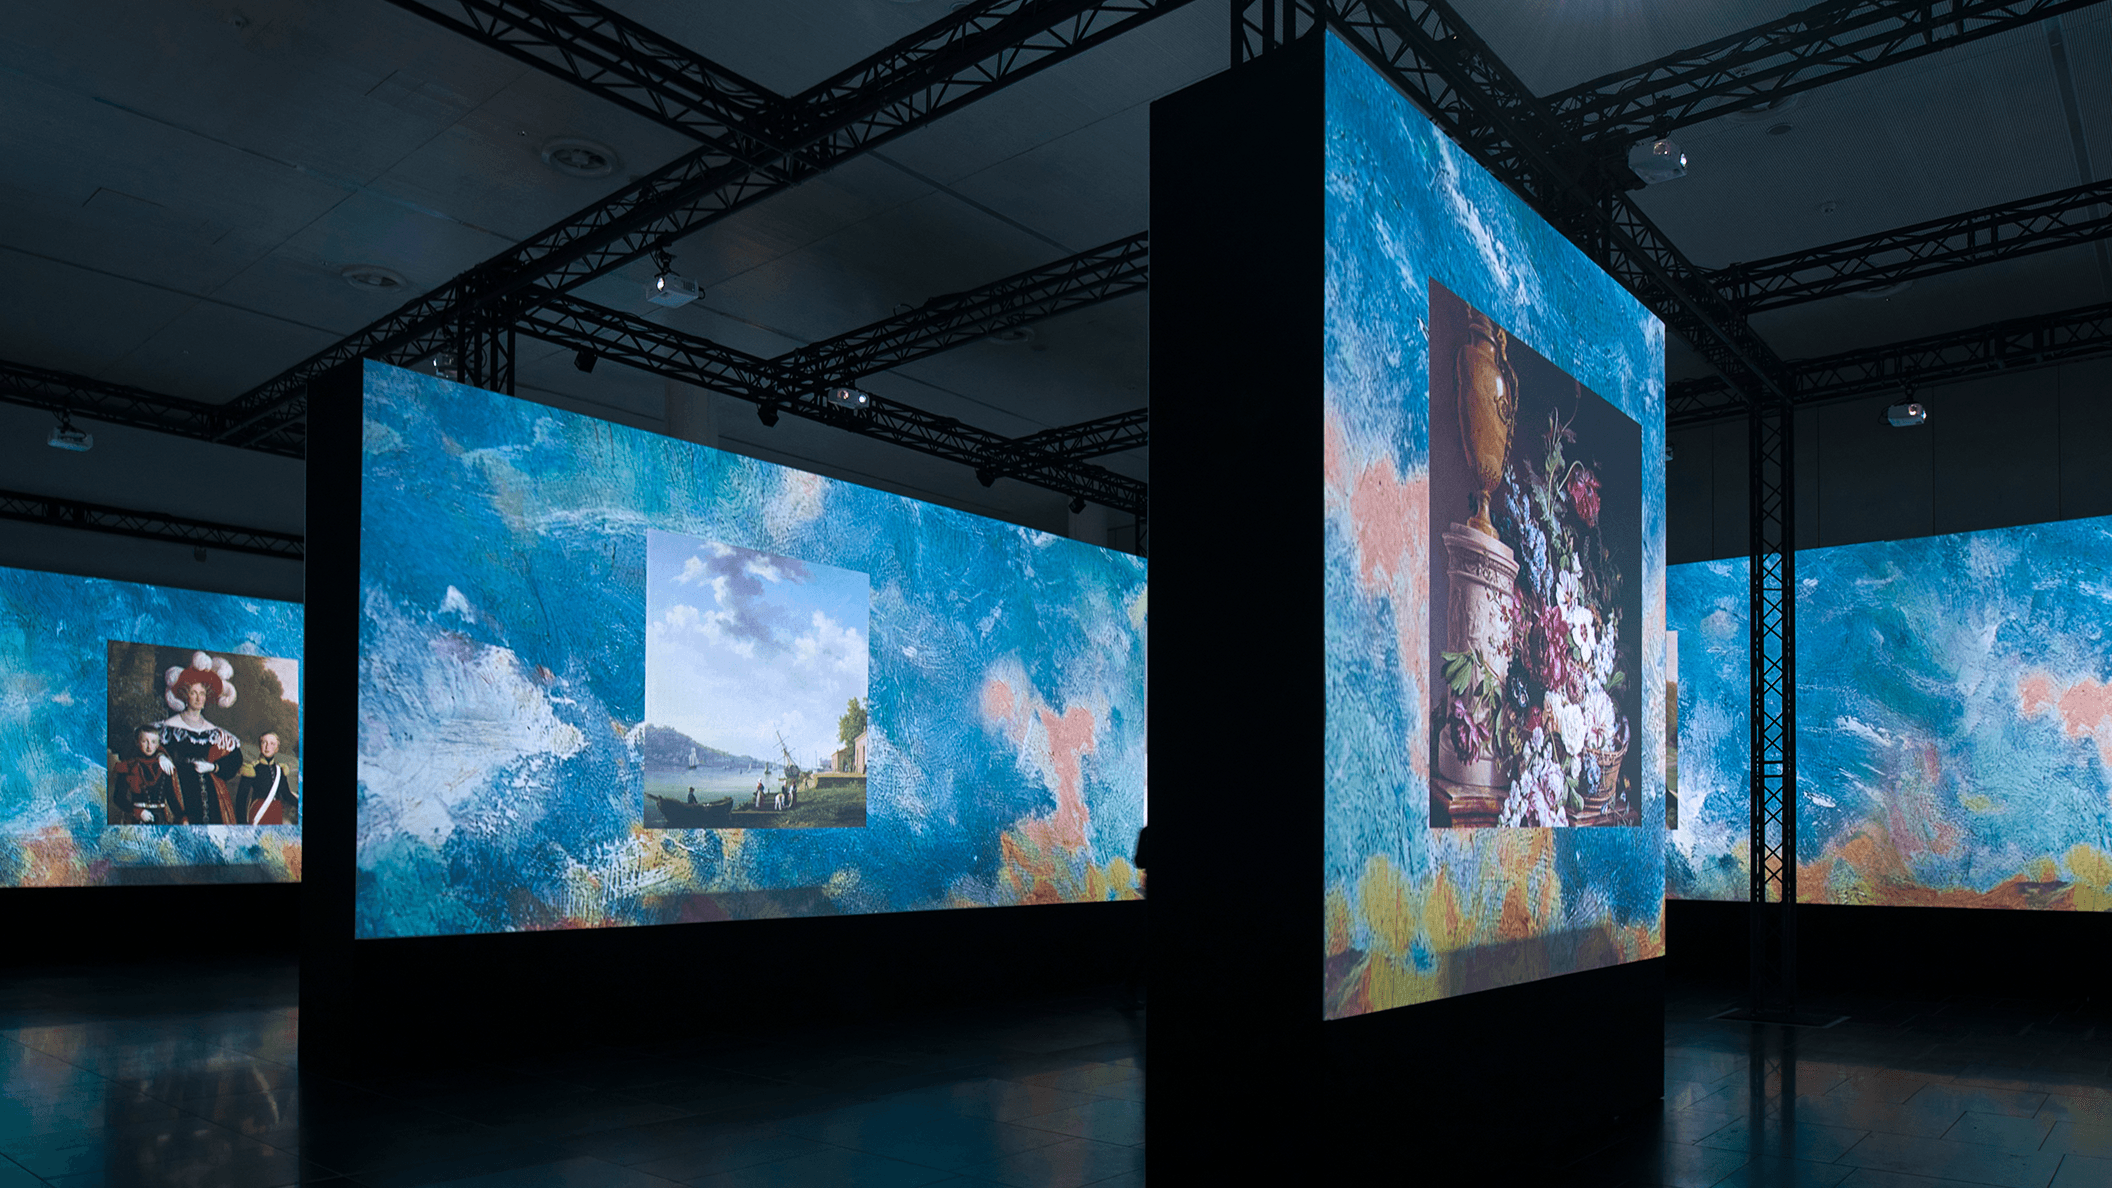 Large screens in a digital gallery showcasing Screenberry's multimedia exhibition capabilities